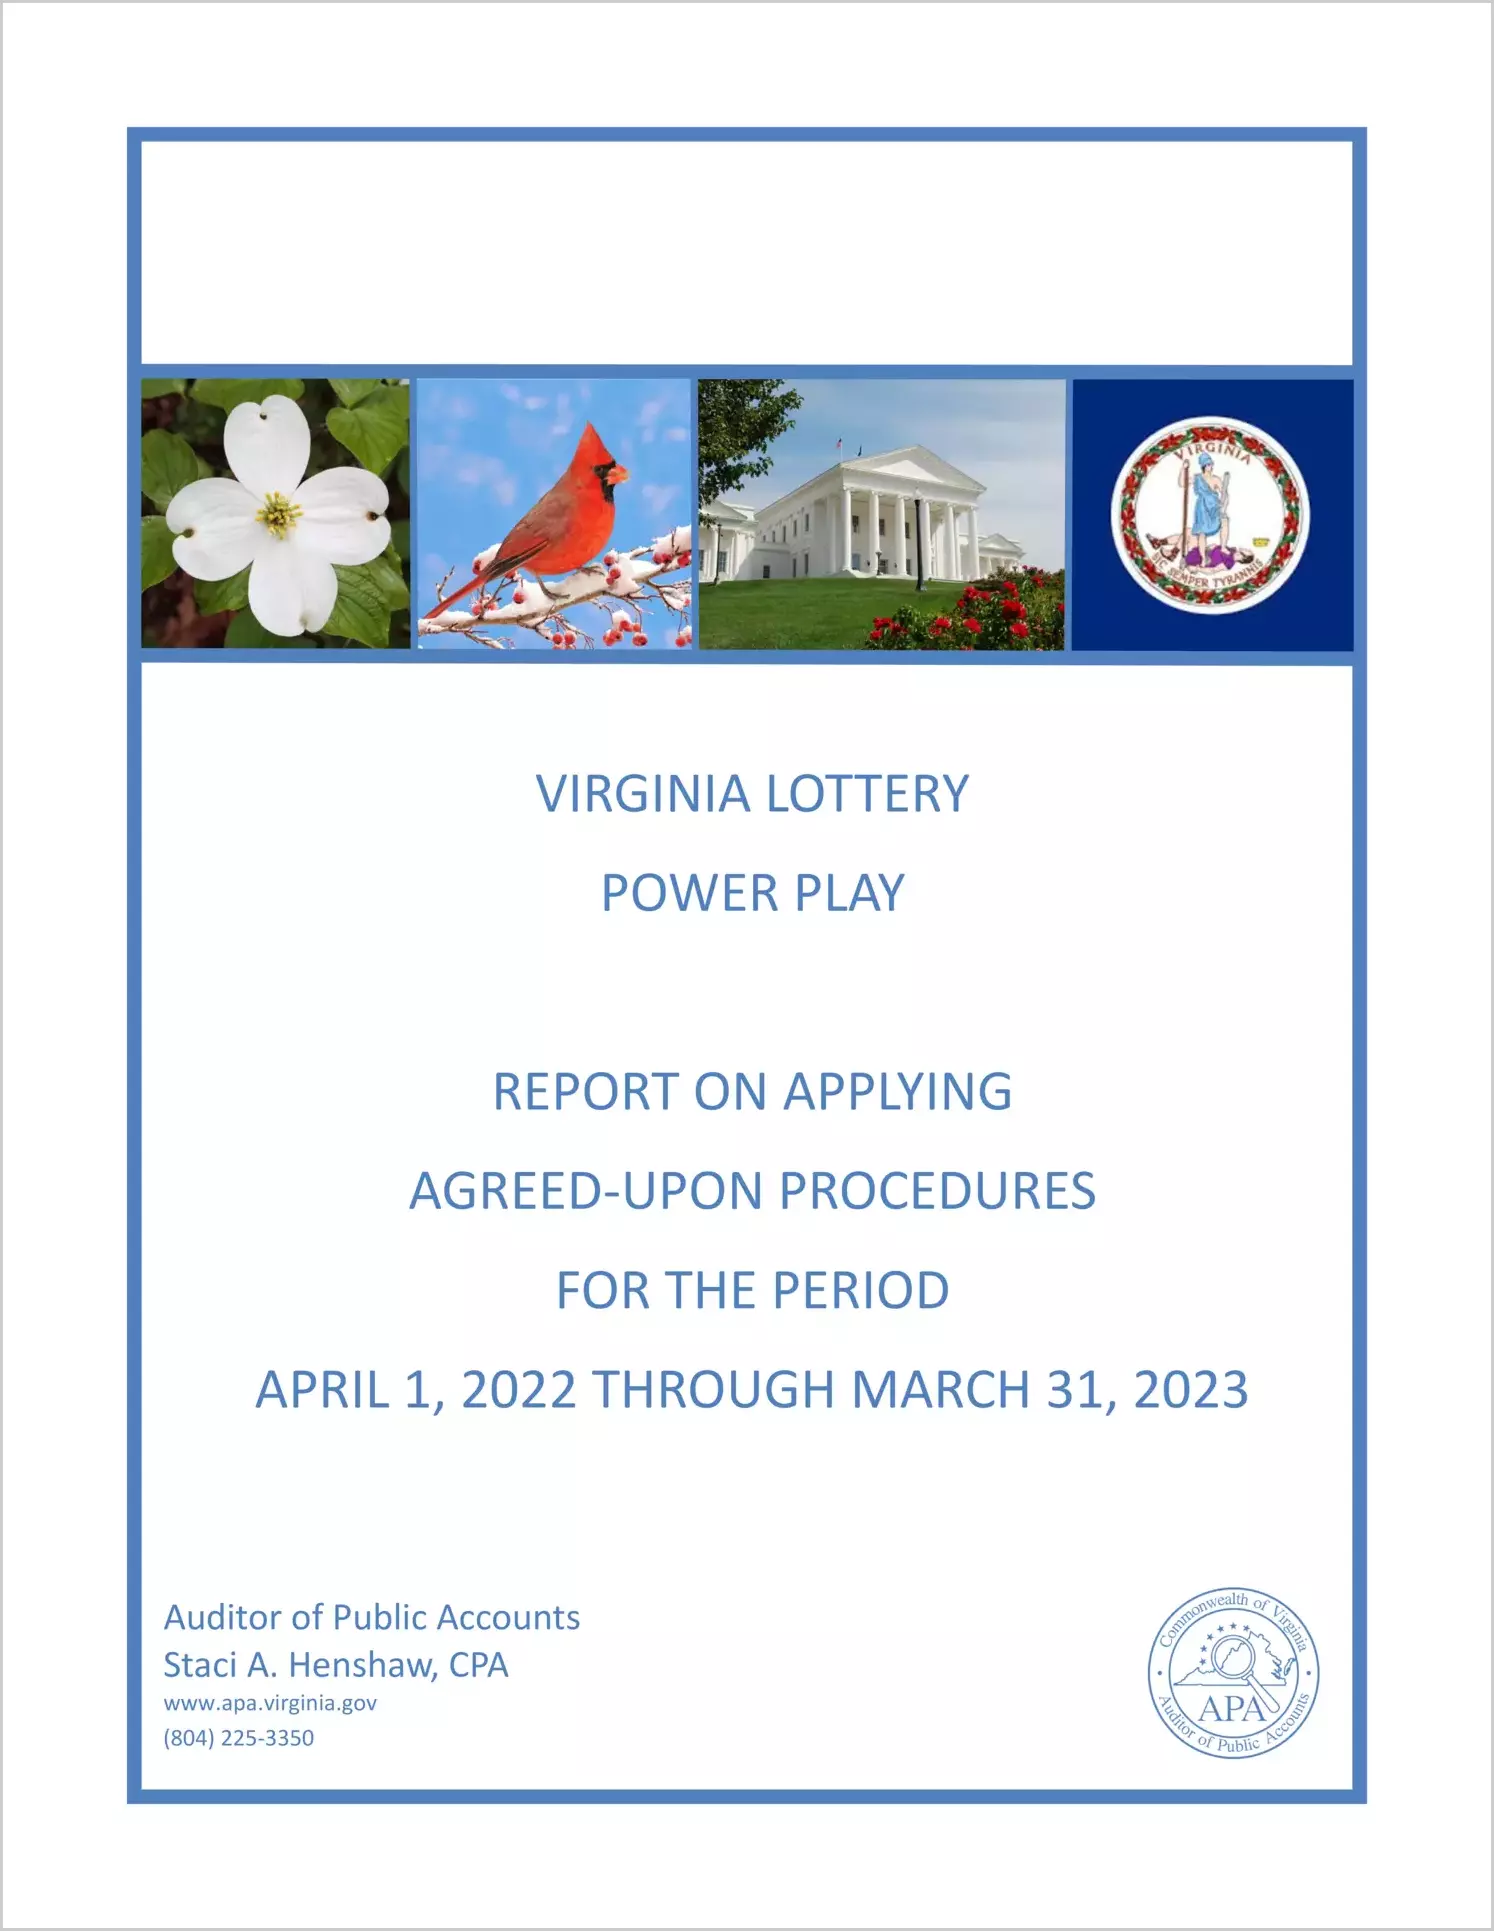 Virginia Lottery Power Play Report on Applying Agreed-Upon Procedures for the period April 1, 2022 through March 31, 2023